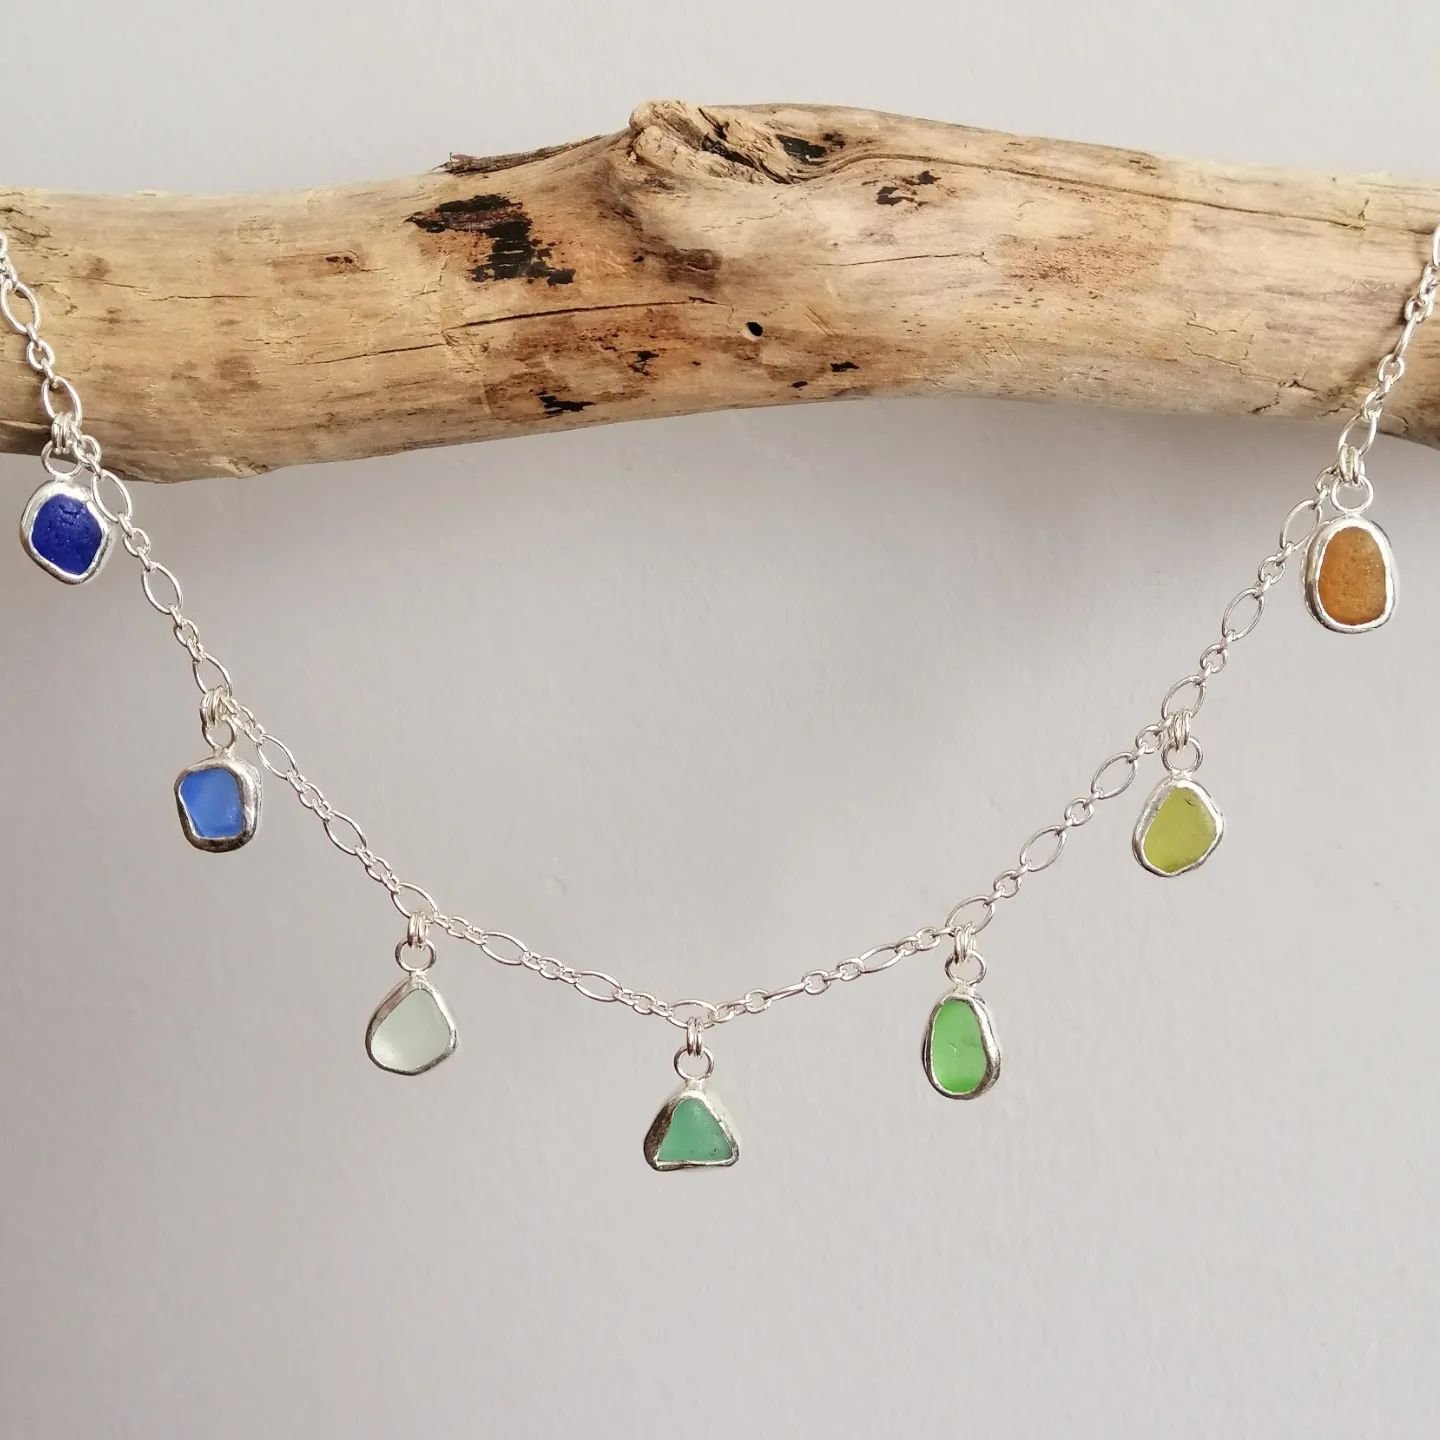 Seaglass necklace with a rainbow of colours 🤩🌈
After making a bracelet version of this a few weeks ago I really wanted to make a necklace too! So here it is 💕🌊 

#seaglassnecklace  #rainbowcolors #seatreasures #beachfinds #beachjewellery